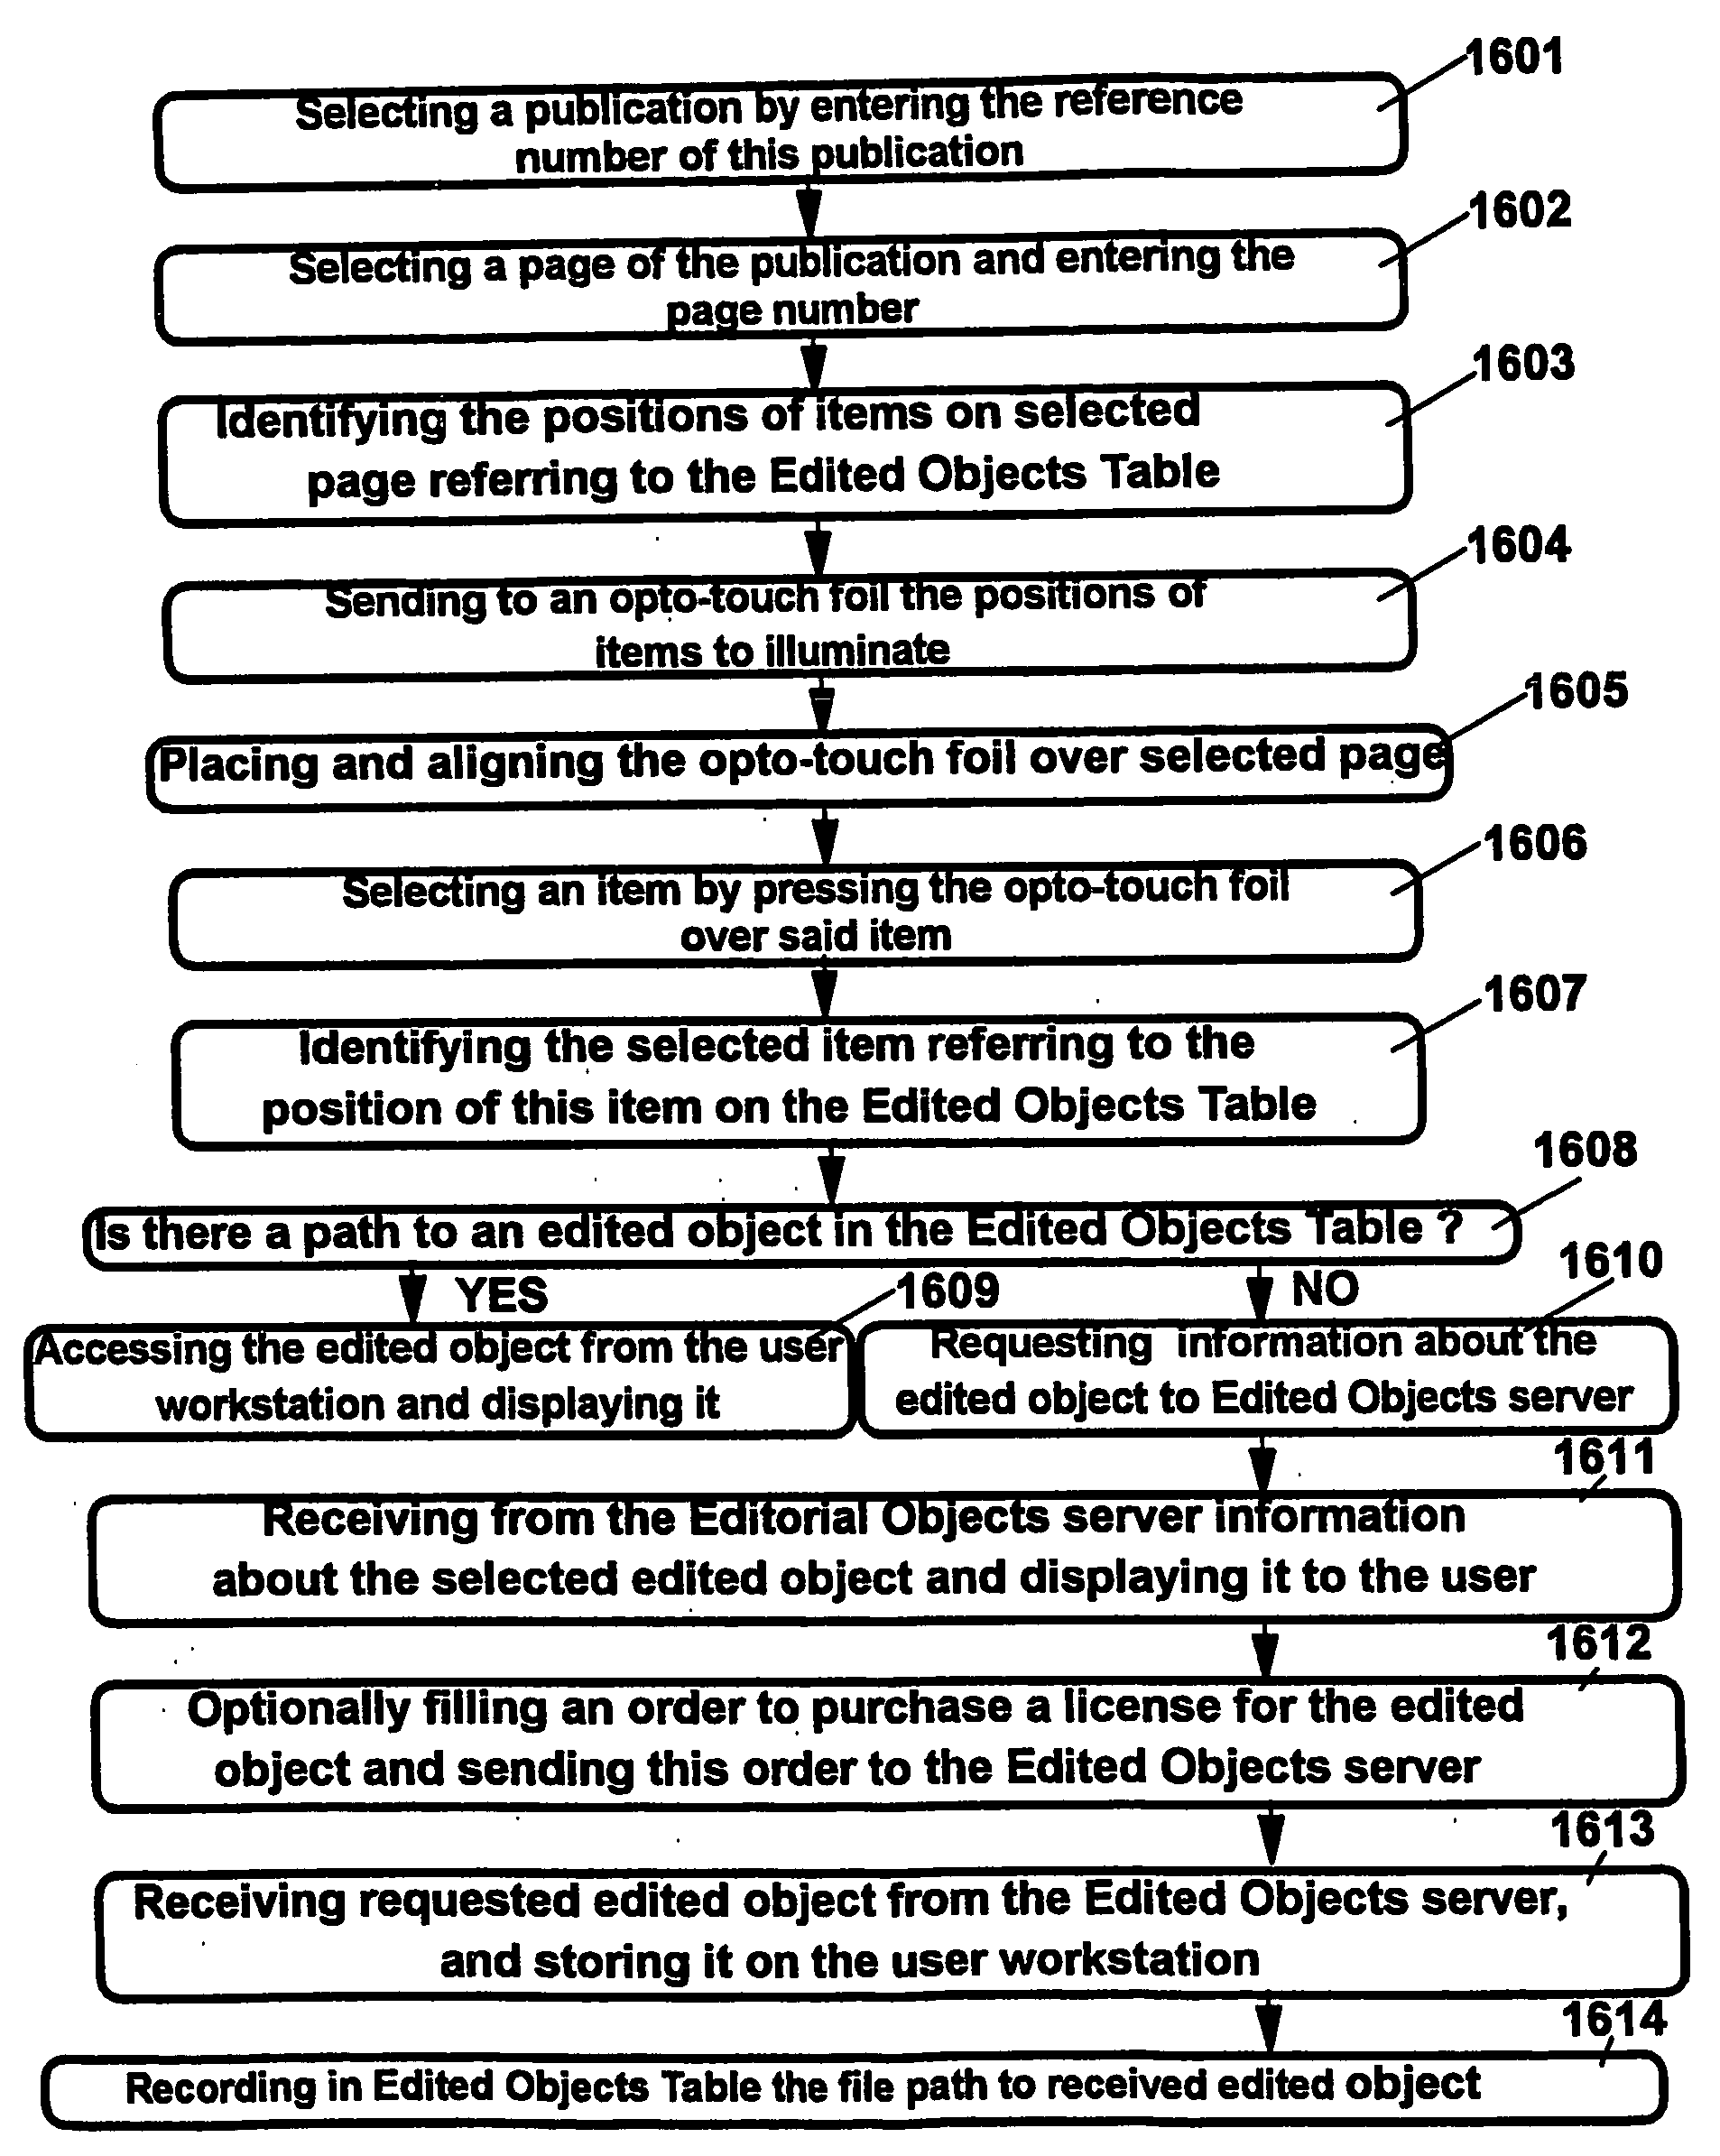 System and method for selecting, ordering and accessing copyrighted information from physical documents